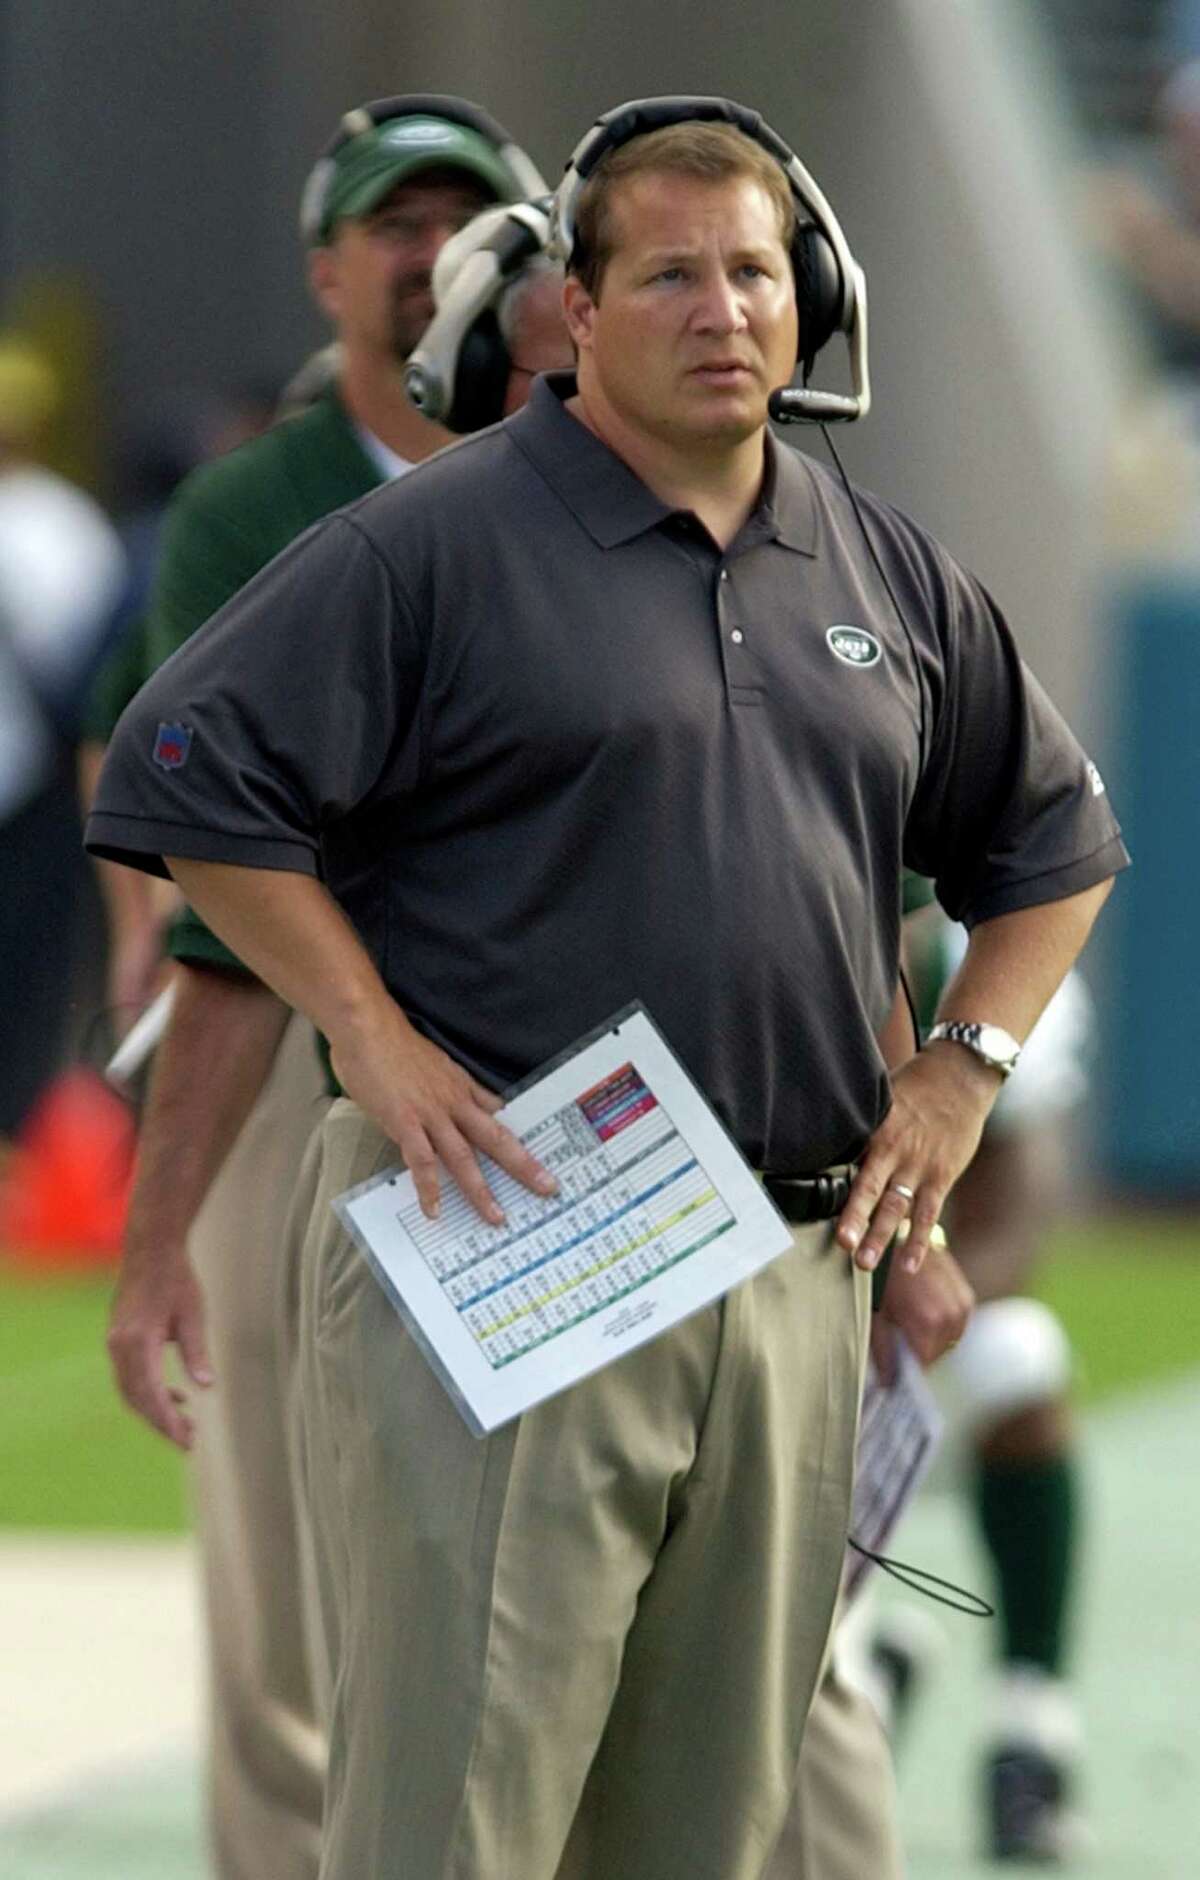 ** FILE ** New York Jets head coach Eric Mangini questions a call in the second quarter against Jacksonville Jaguars, Sunday, Oct. 8, 2006, in Jacksonville, Fla. (AP Photo Stephen Morton)